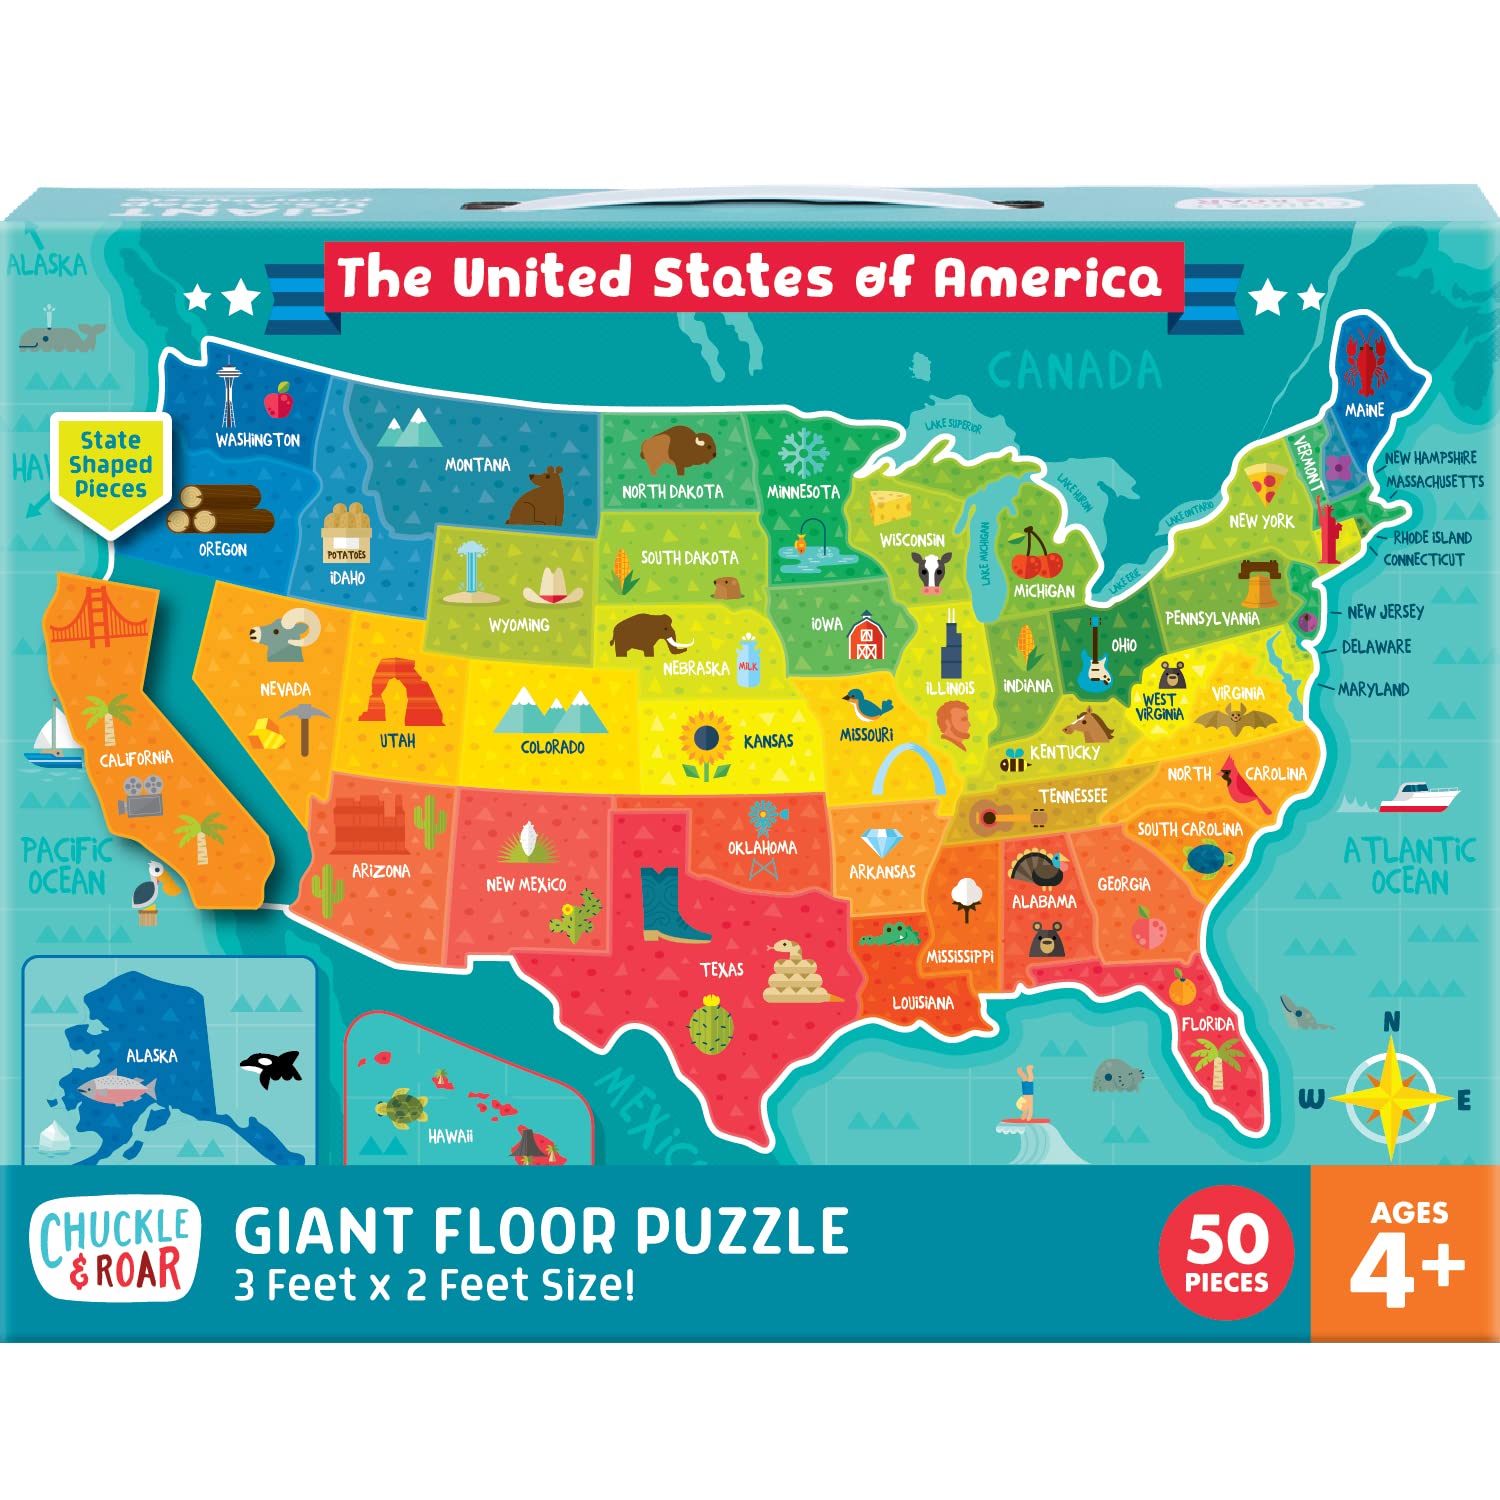 Chuckle & Roar - USA Map Puzzle - Engaging and Educational Puzzles for Kids - Larger Pieces Designed for Preschool Hands - 50 PC Floor Puzzle